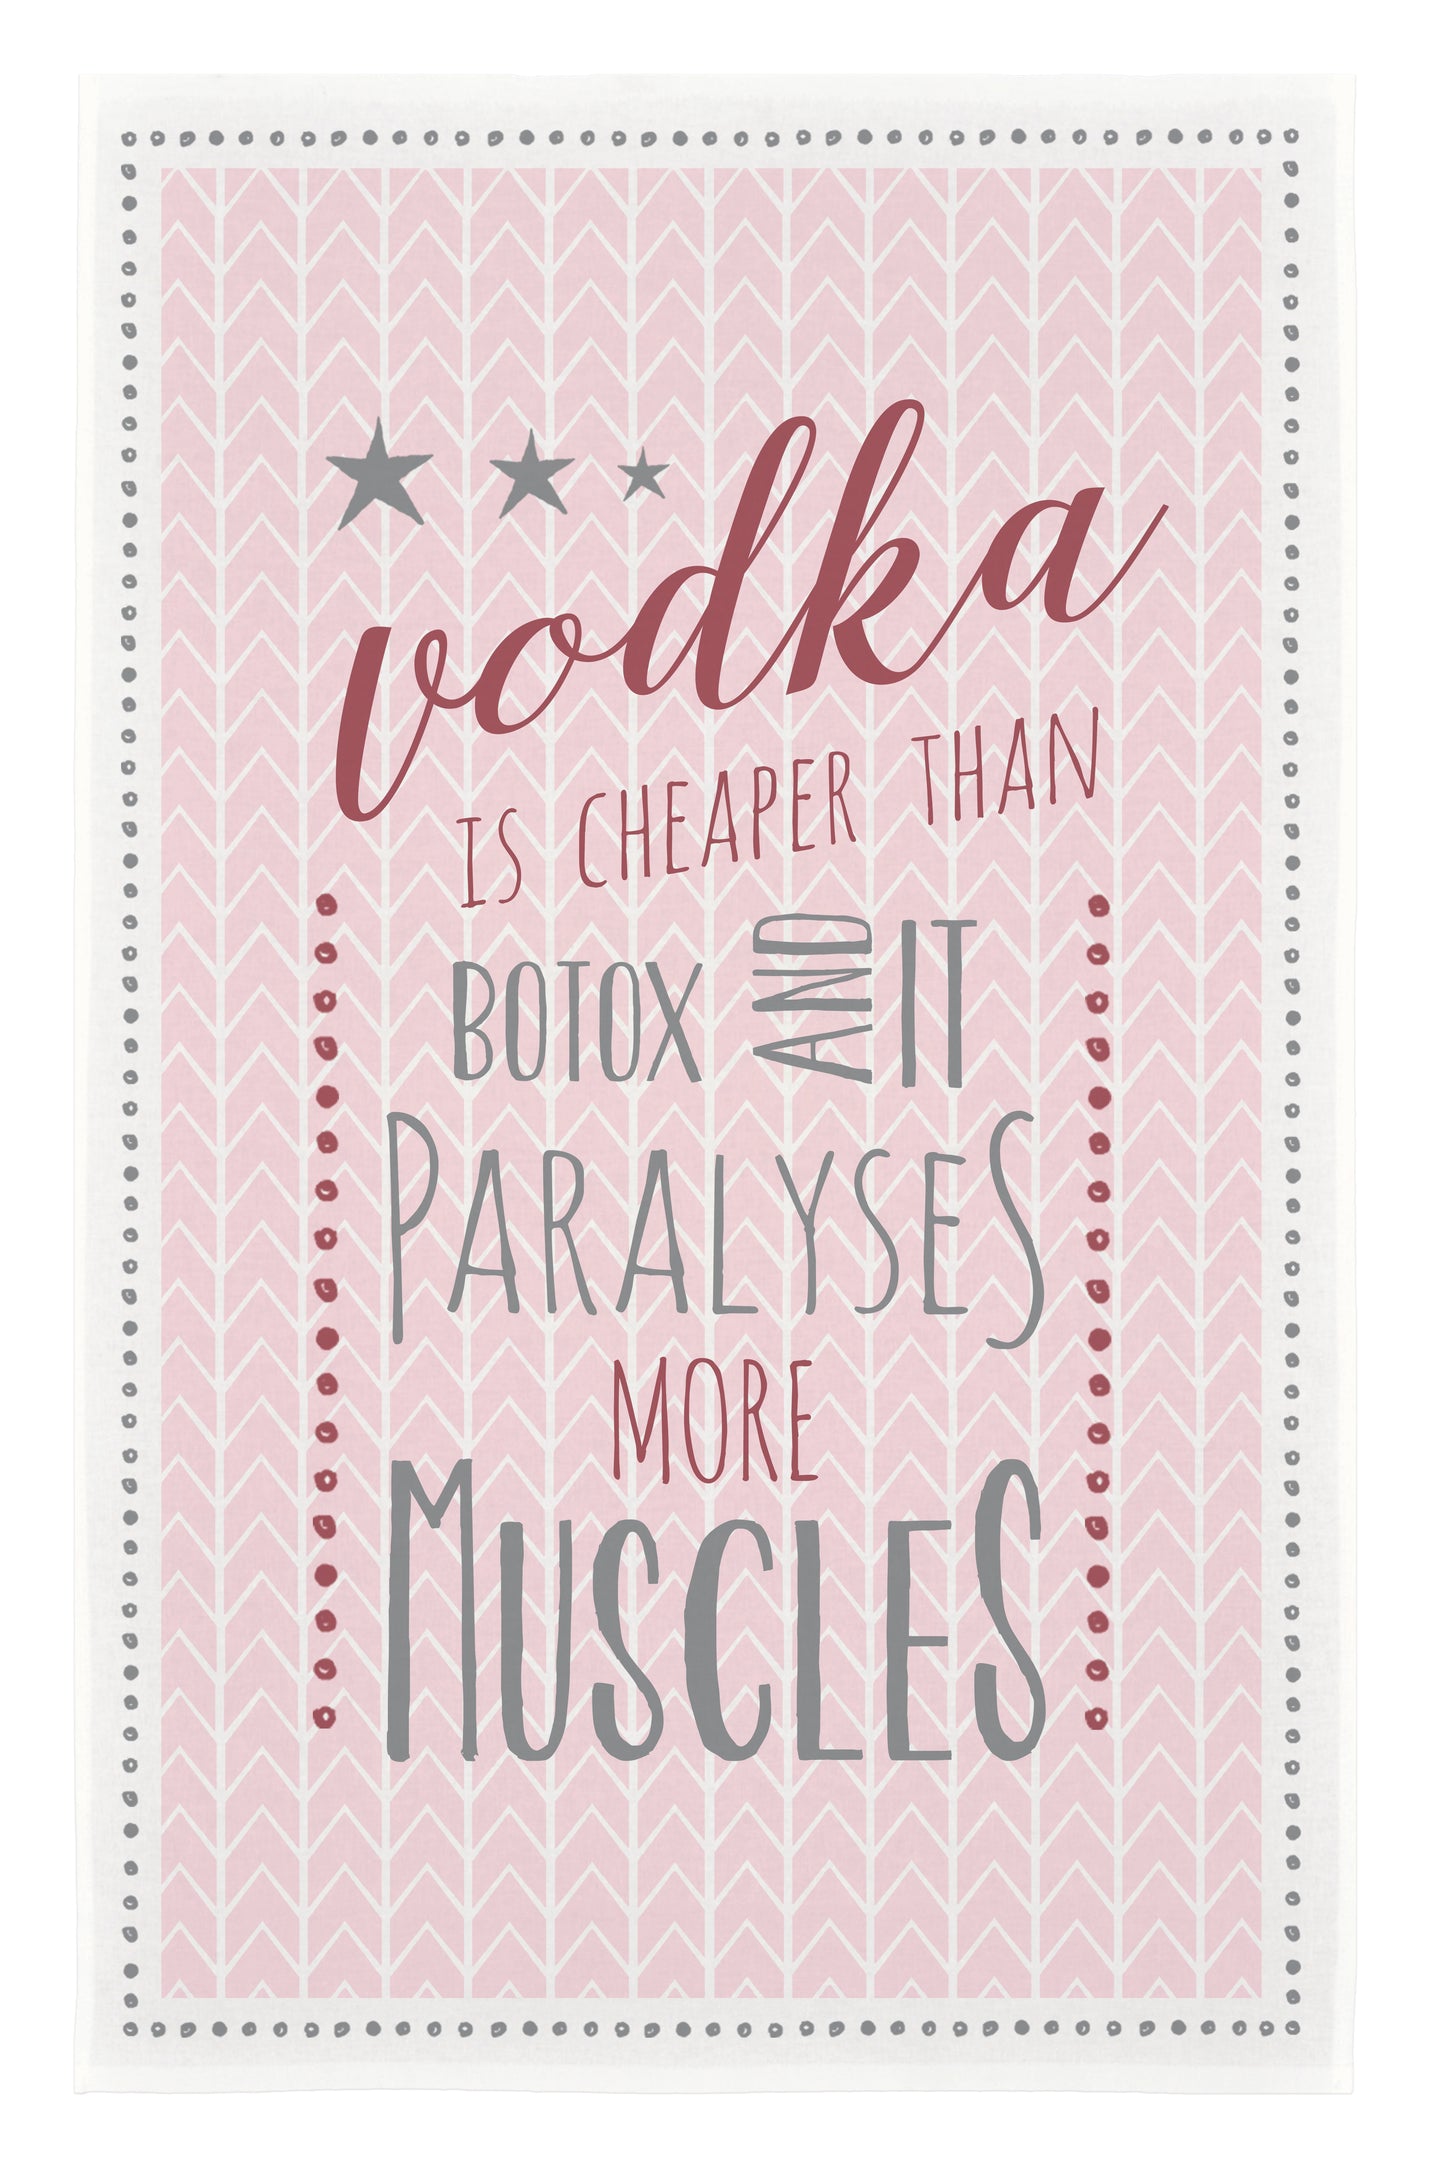 East Of India: Cotton Tea Towel: Vodka is cheaper than botox and it paralyses more muscles